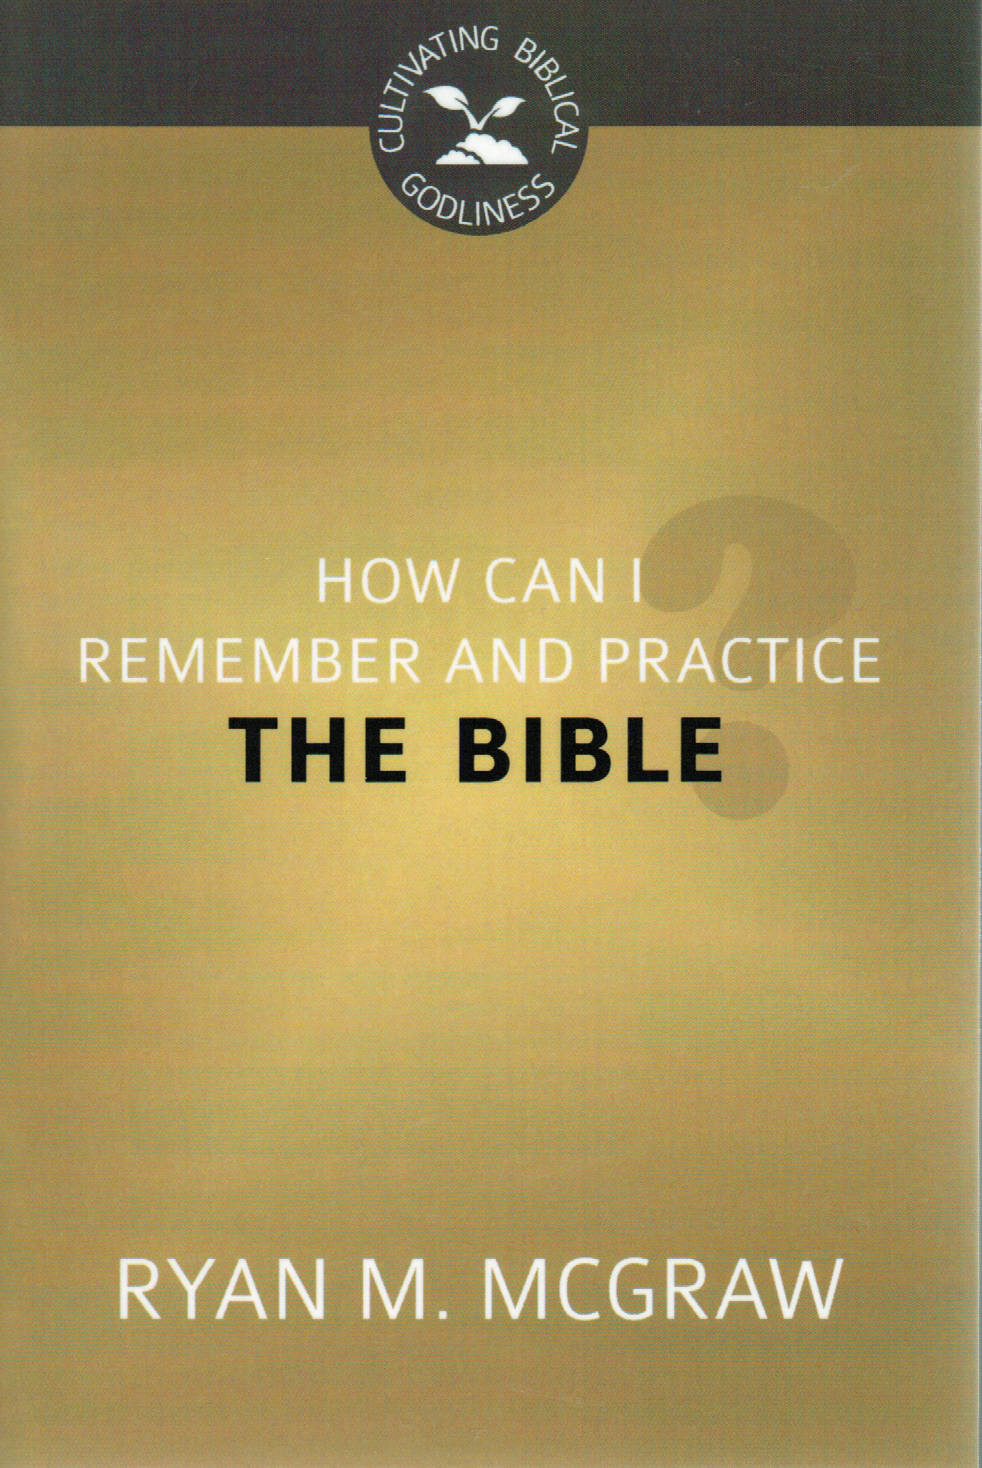 Cultivating Biblical Godliness - How Can I Remember and Practice the Bible?